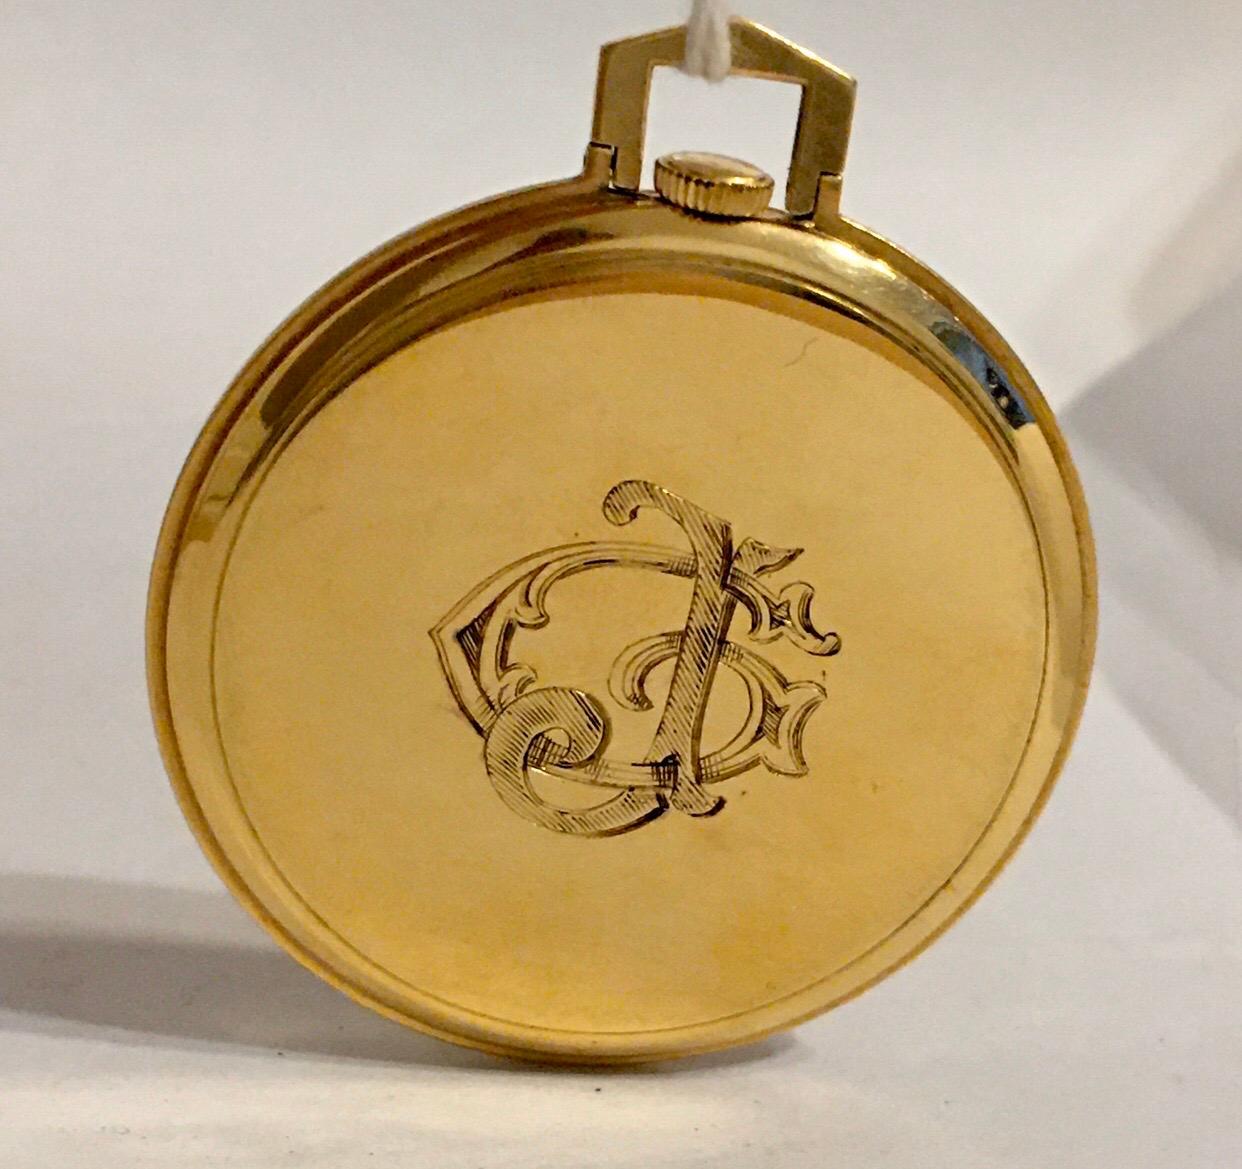 Rare 18k Gold Rolex Observatory Prince Imperial Dress Pocket Watch, circa 1950s For Sale 6